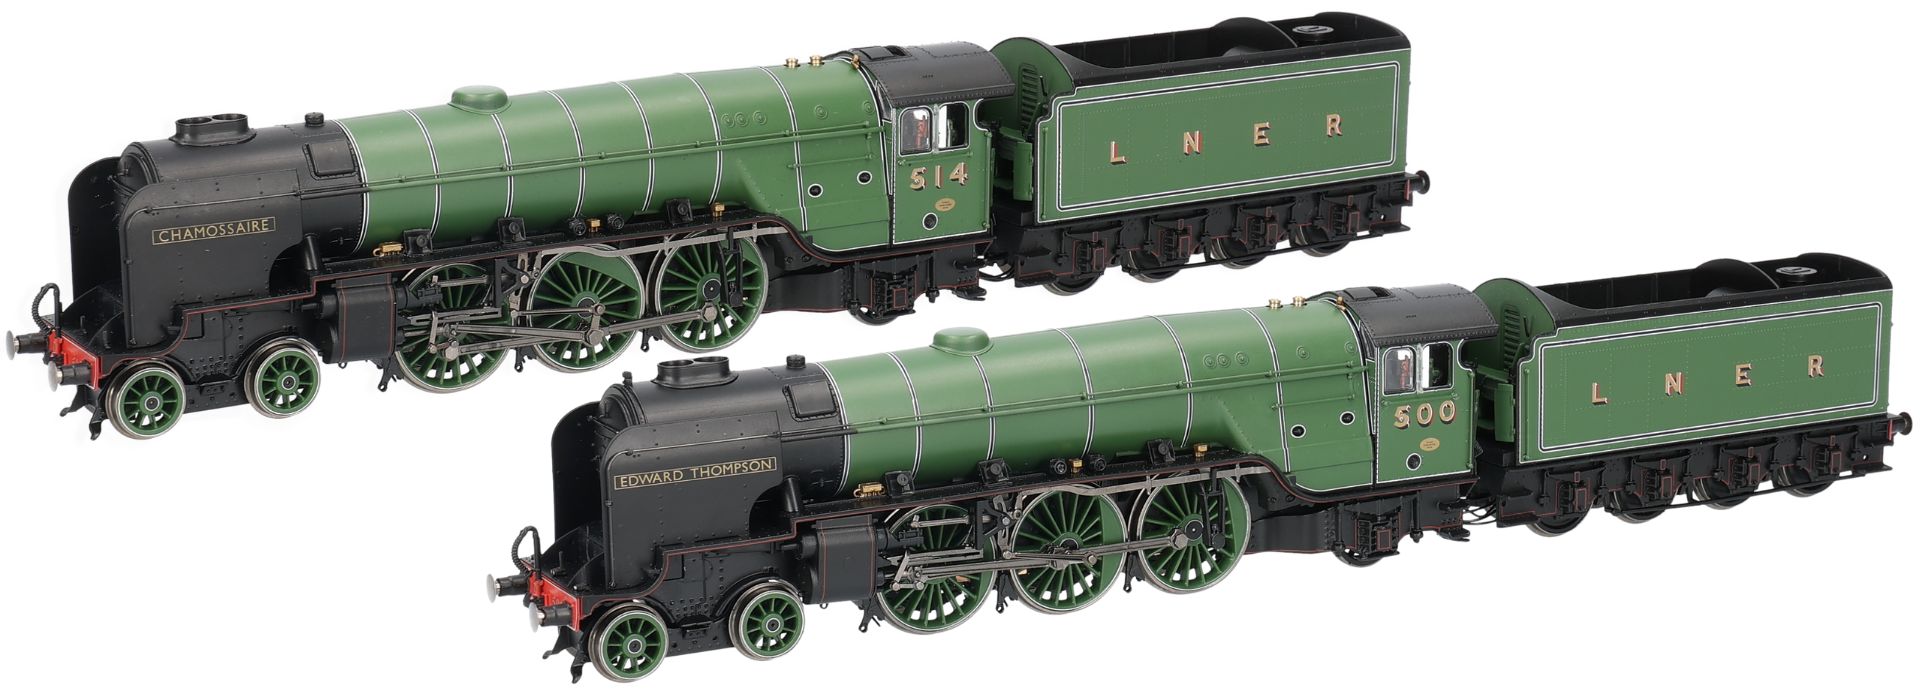 Hornby OO Gauge (1:76 Scale) 4-6-2 Class A2/3 Thompson LNER